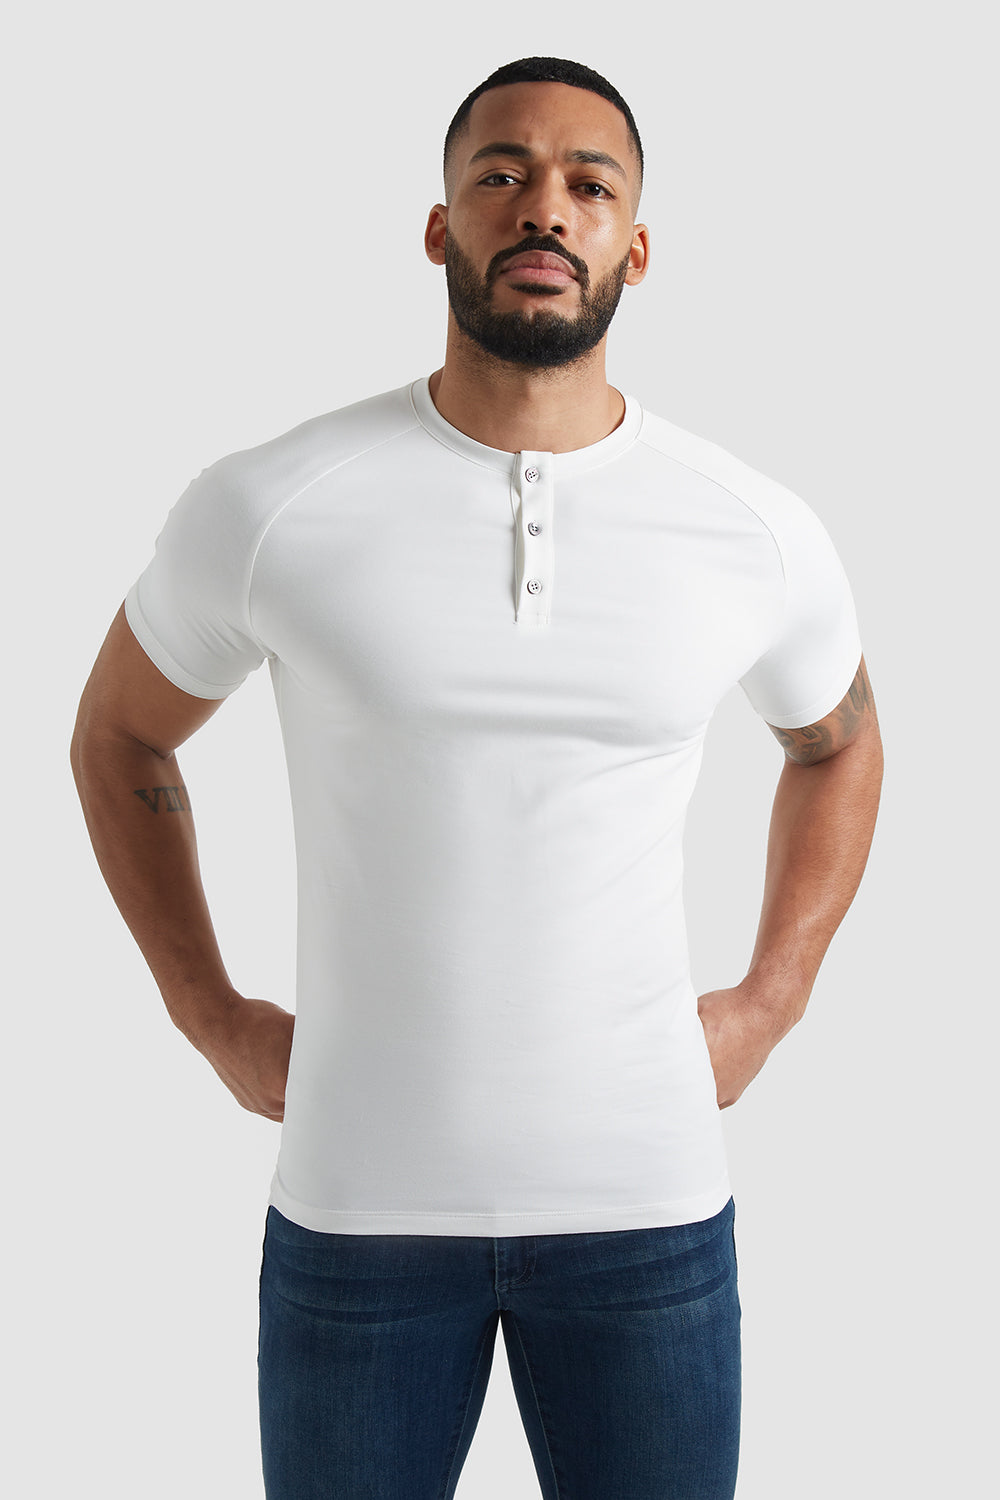 Tailored Athlete Athletic Fit Stretch T-Shirt, White, XL